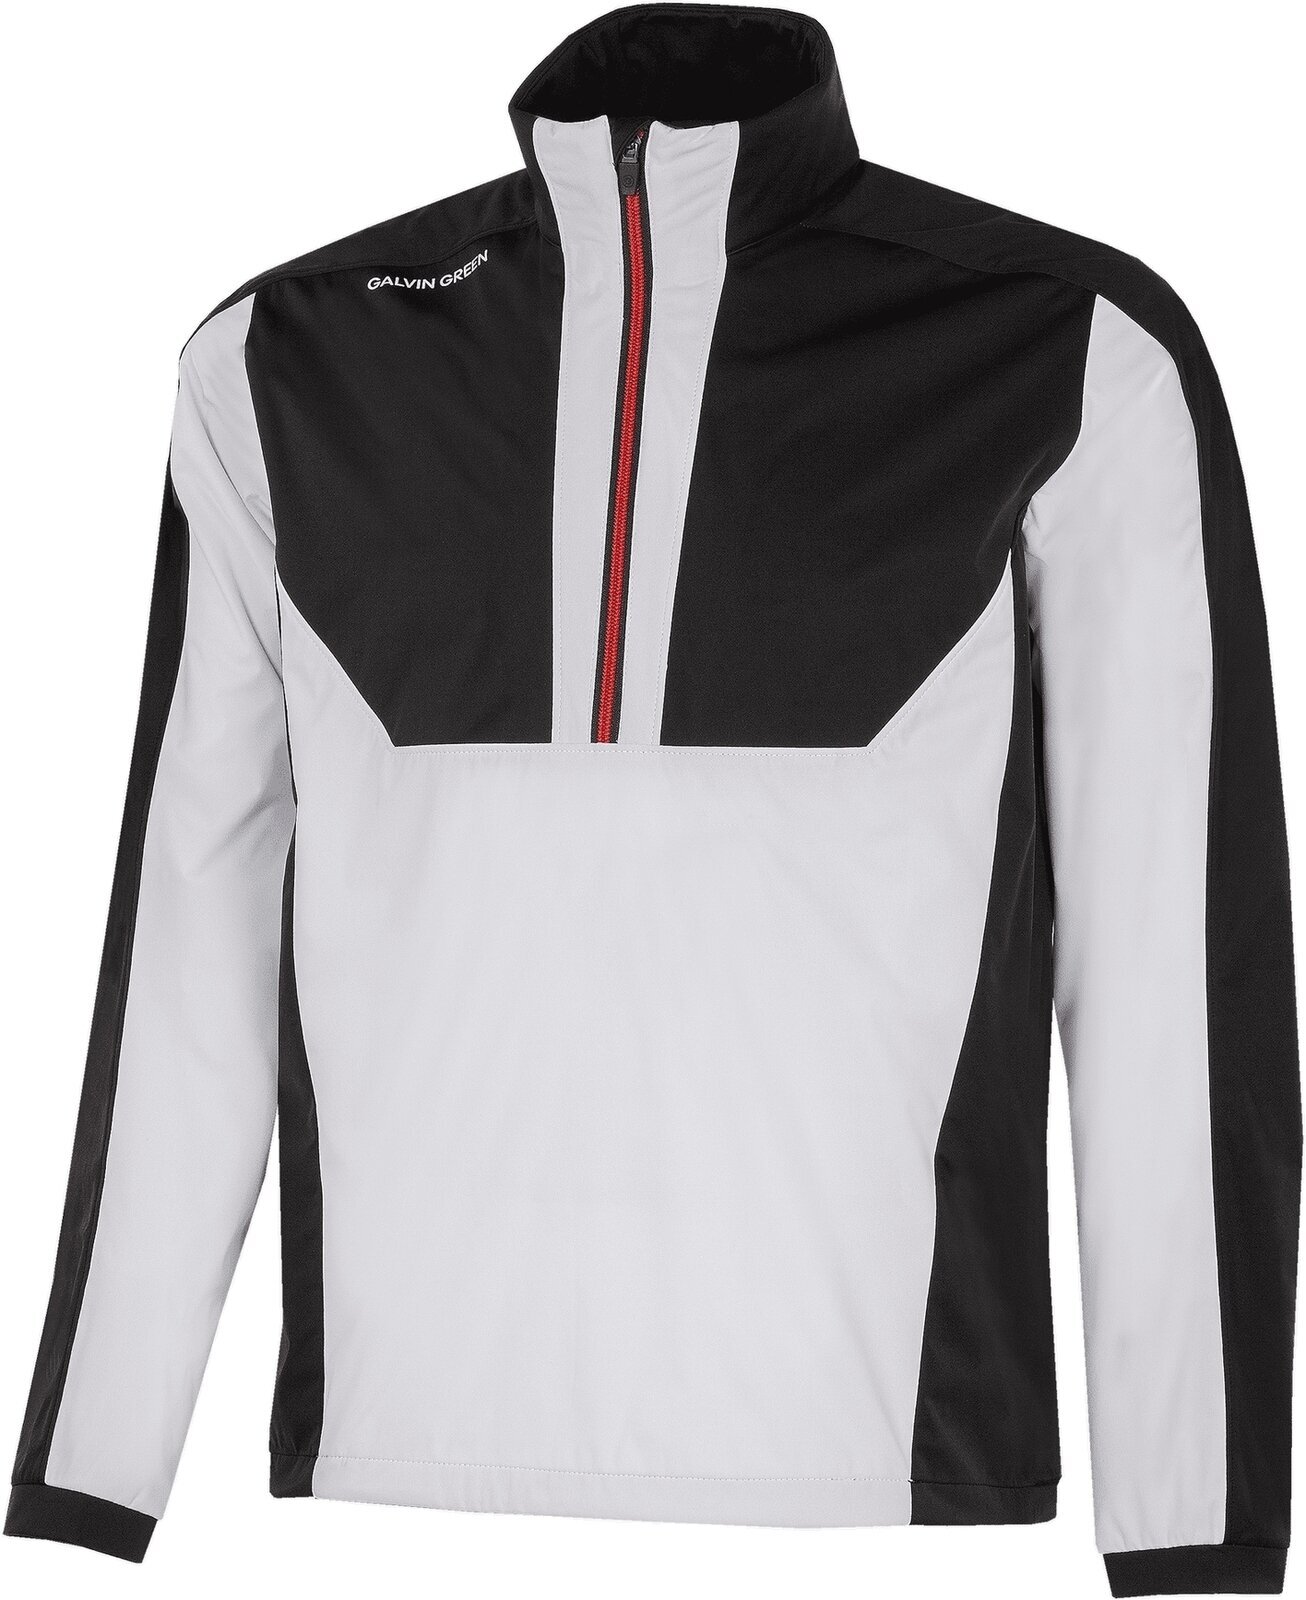 Jakna Galvin Green Lawrence Mens Windproof And Water Repellent Jacket White/Black/Red L